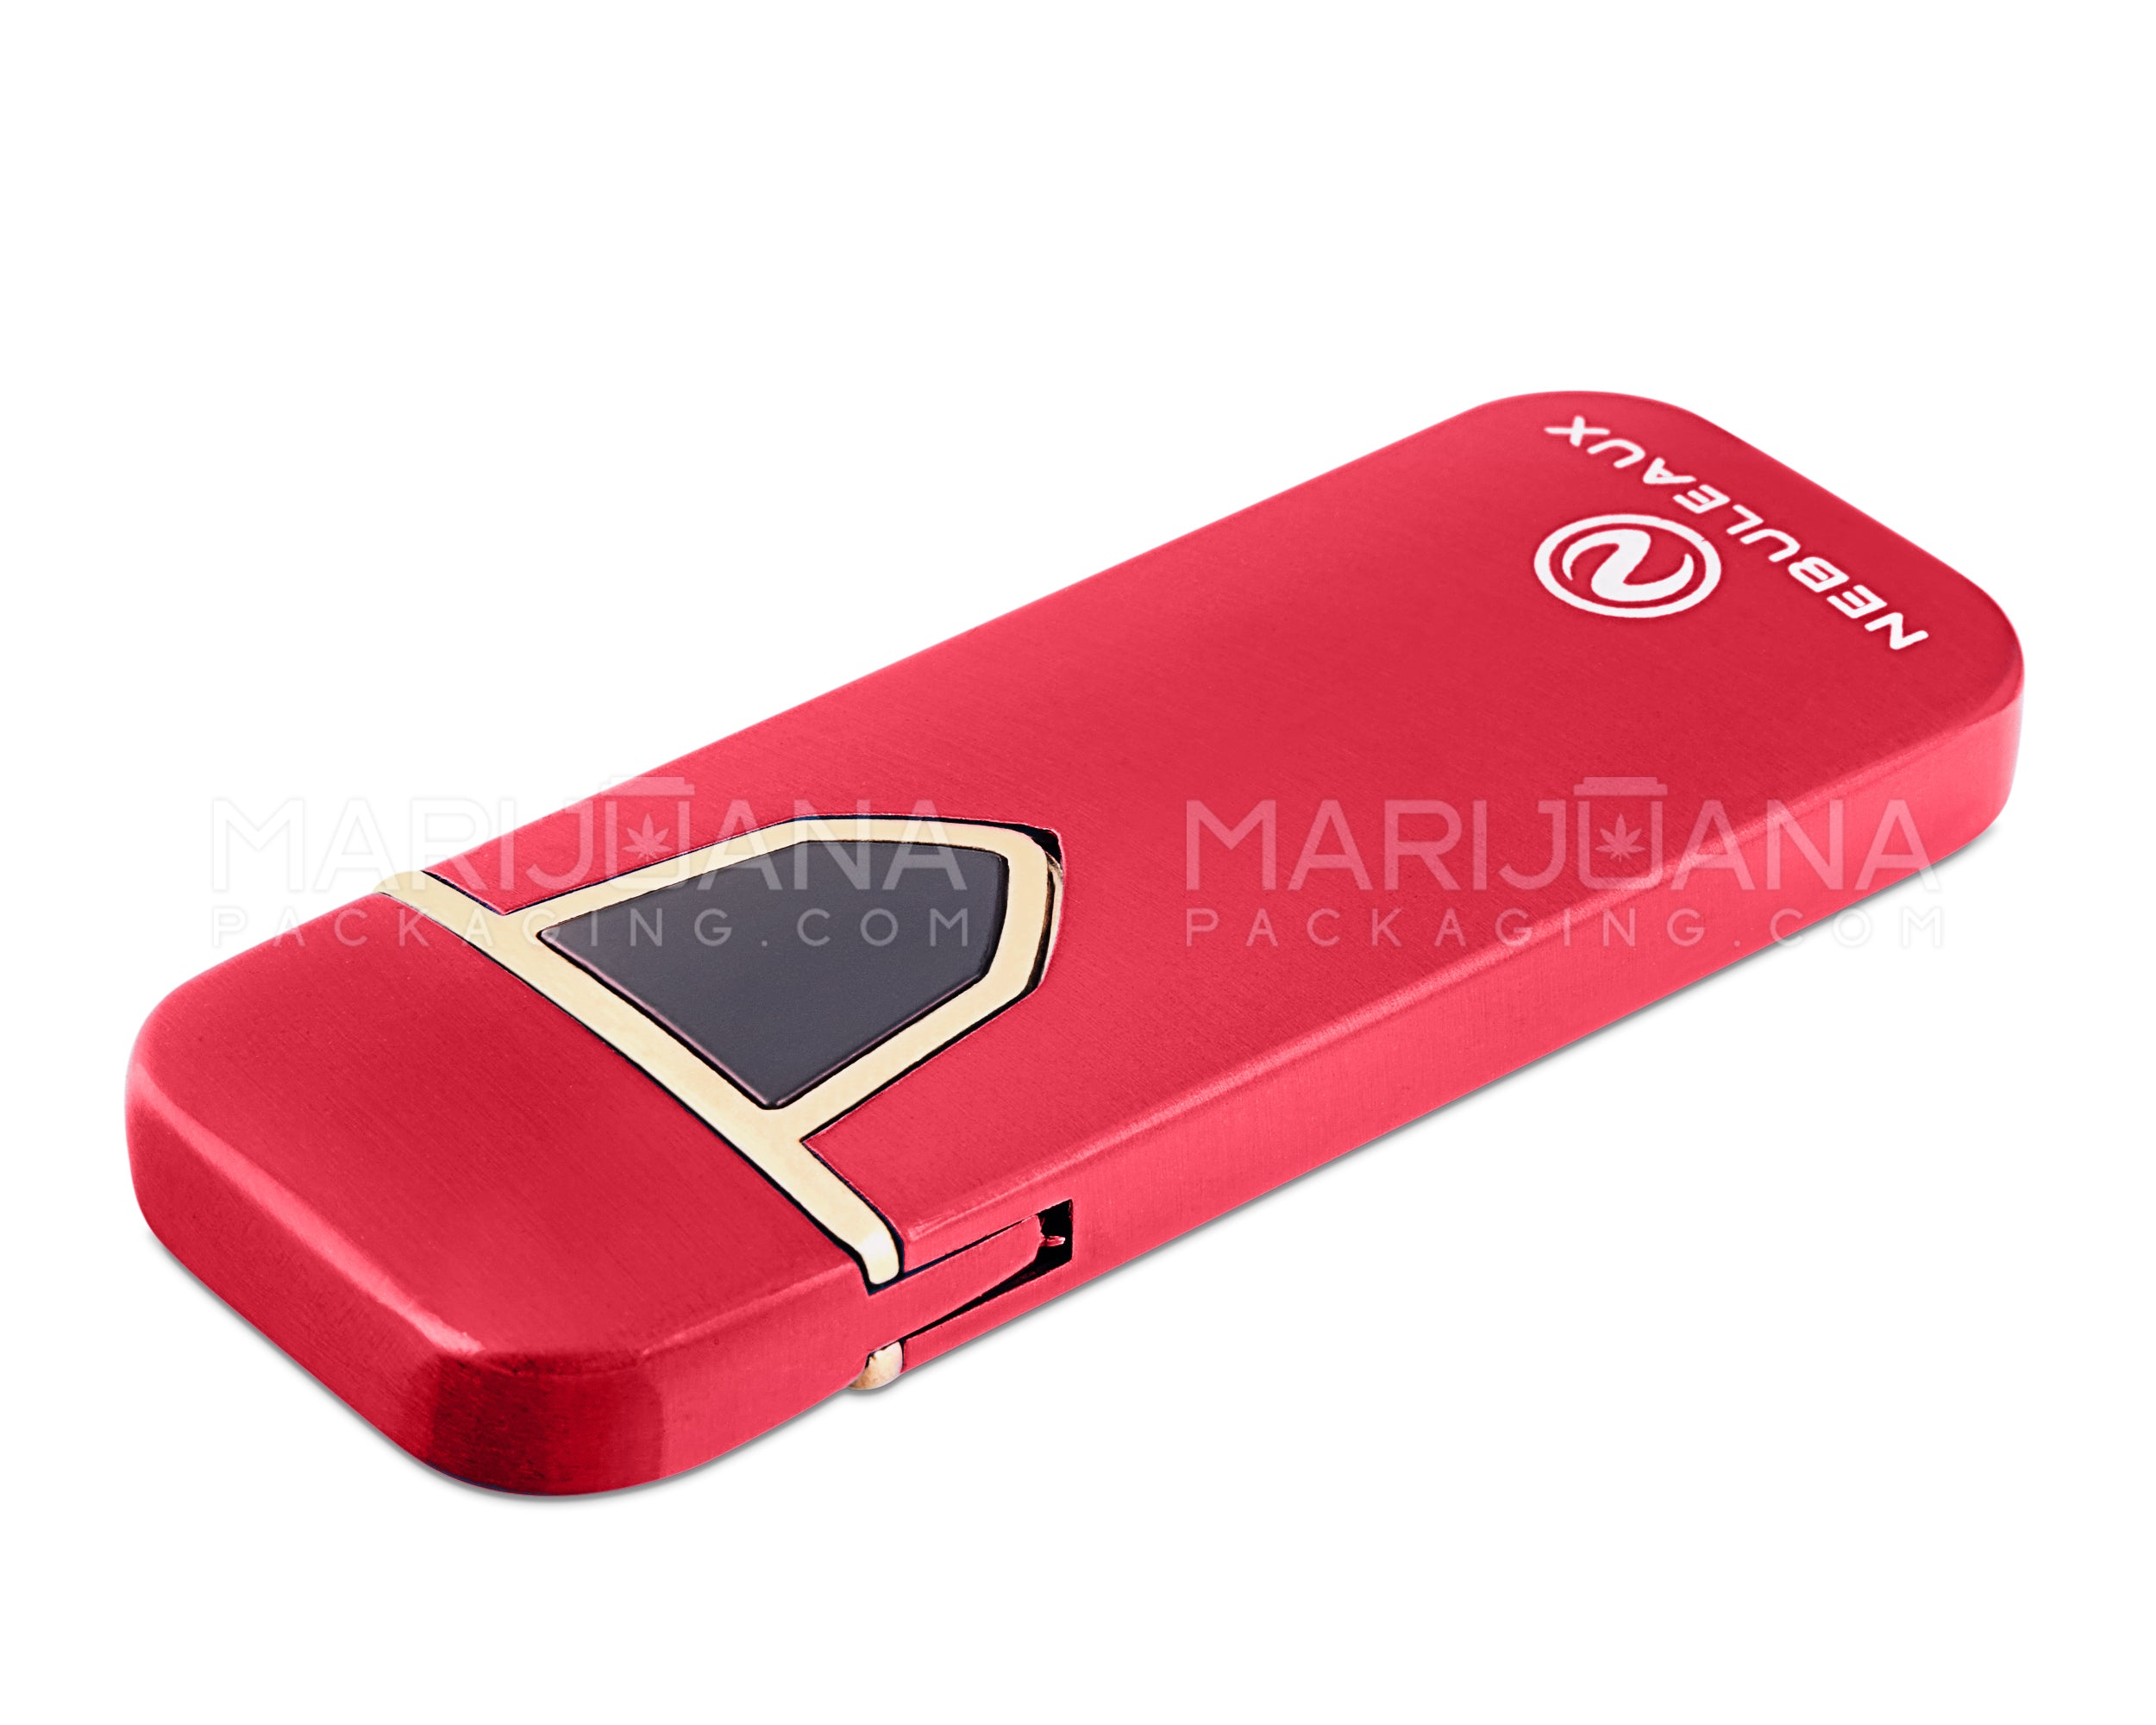 NEBULEAUX | USB Metal Flameless Lighter | 3in Tall - No Butane - Red